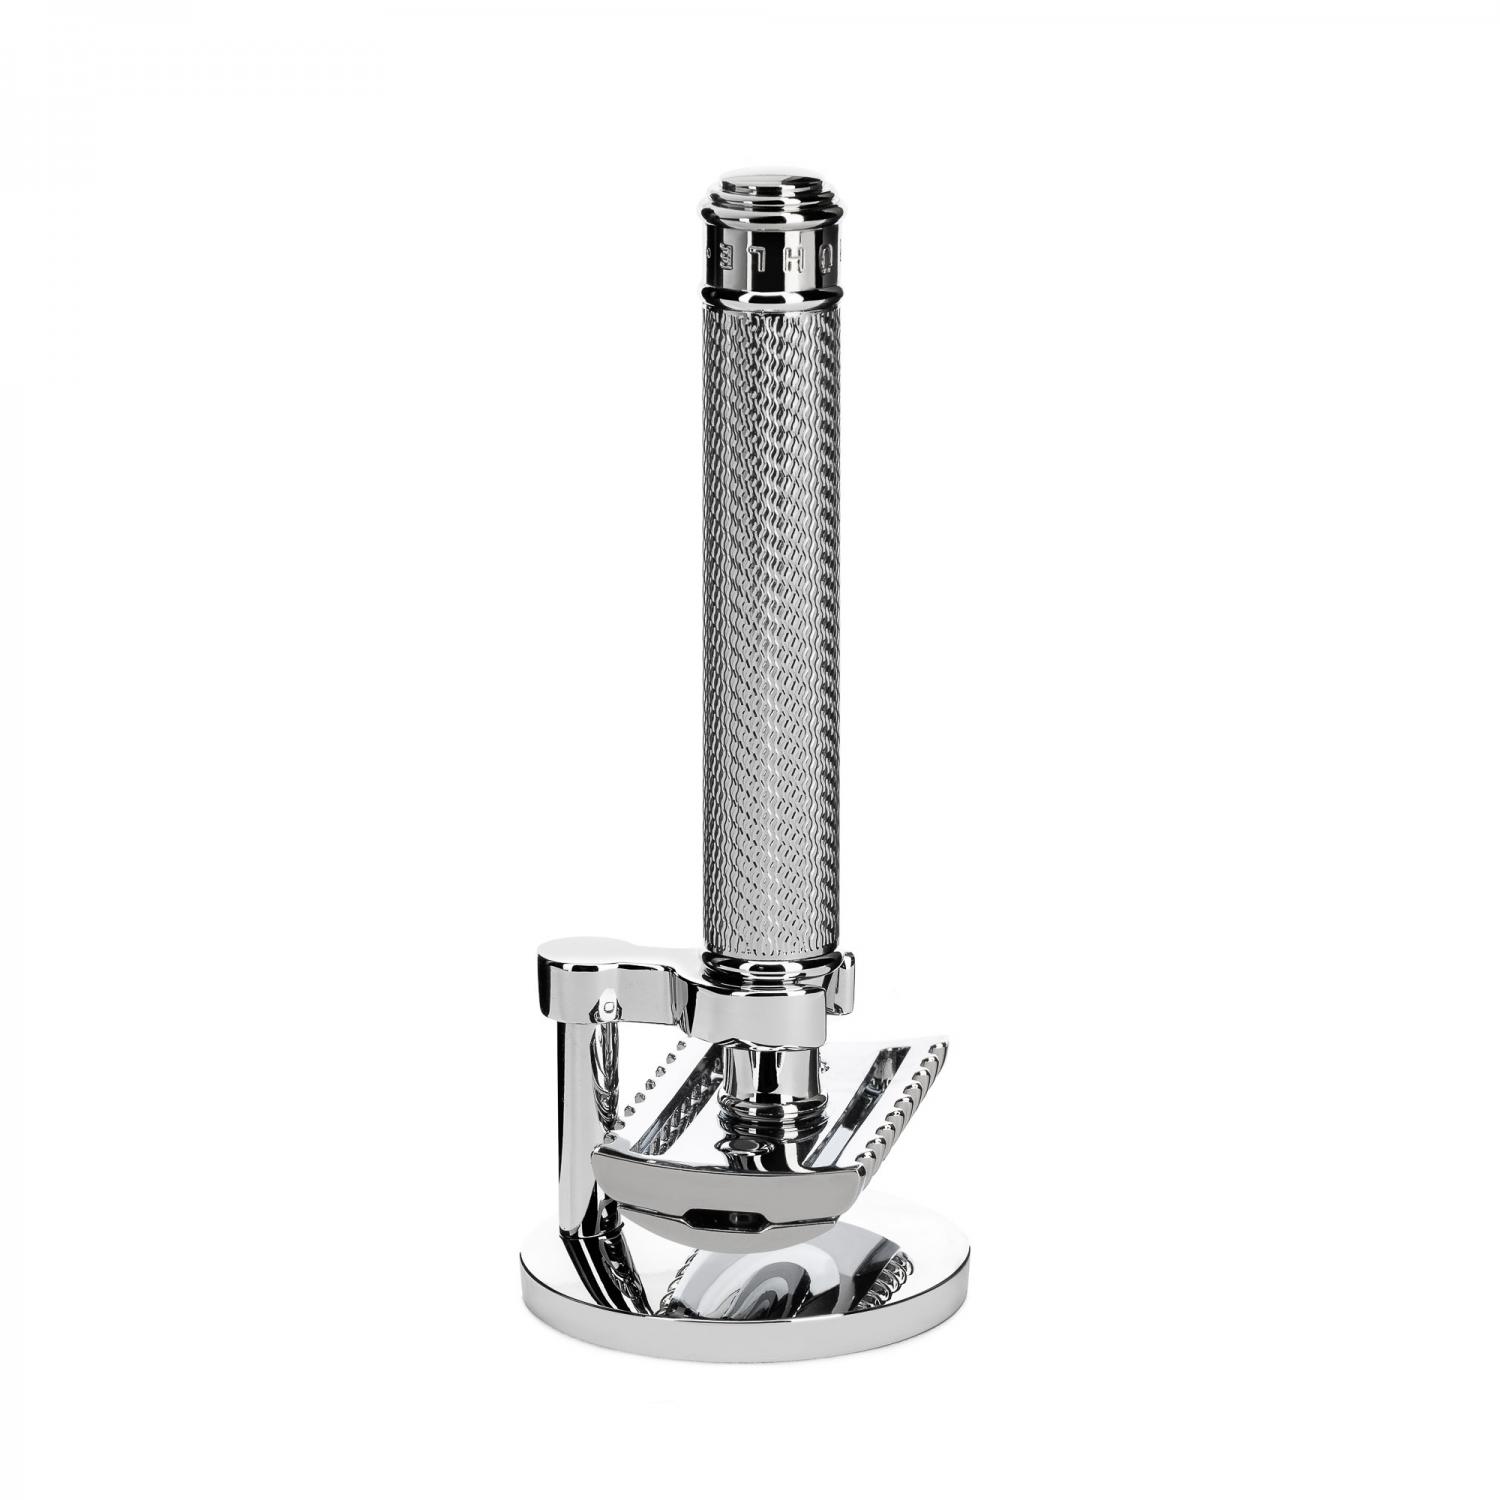 MÜHLE 2-Piece Shaving Set incl. R41 Safety Razor & Stand